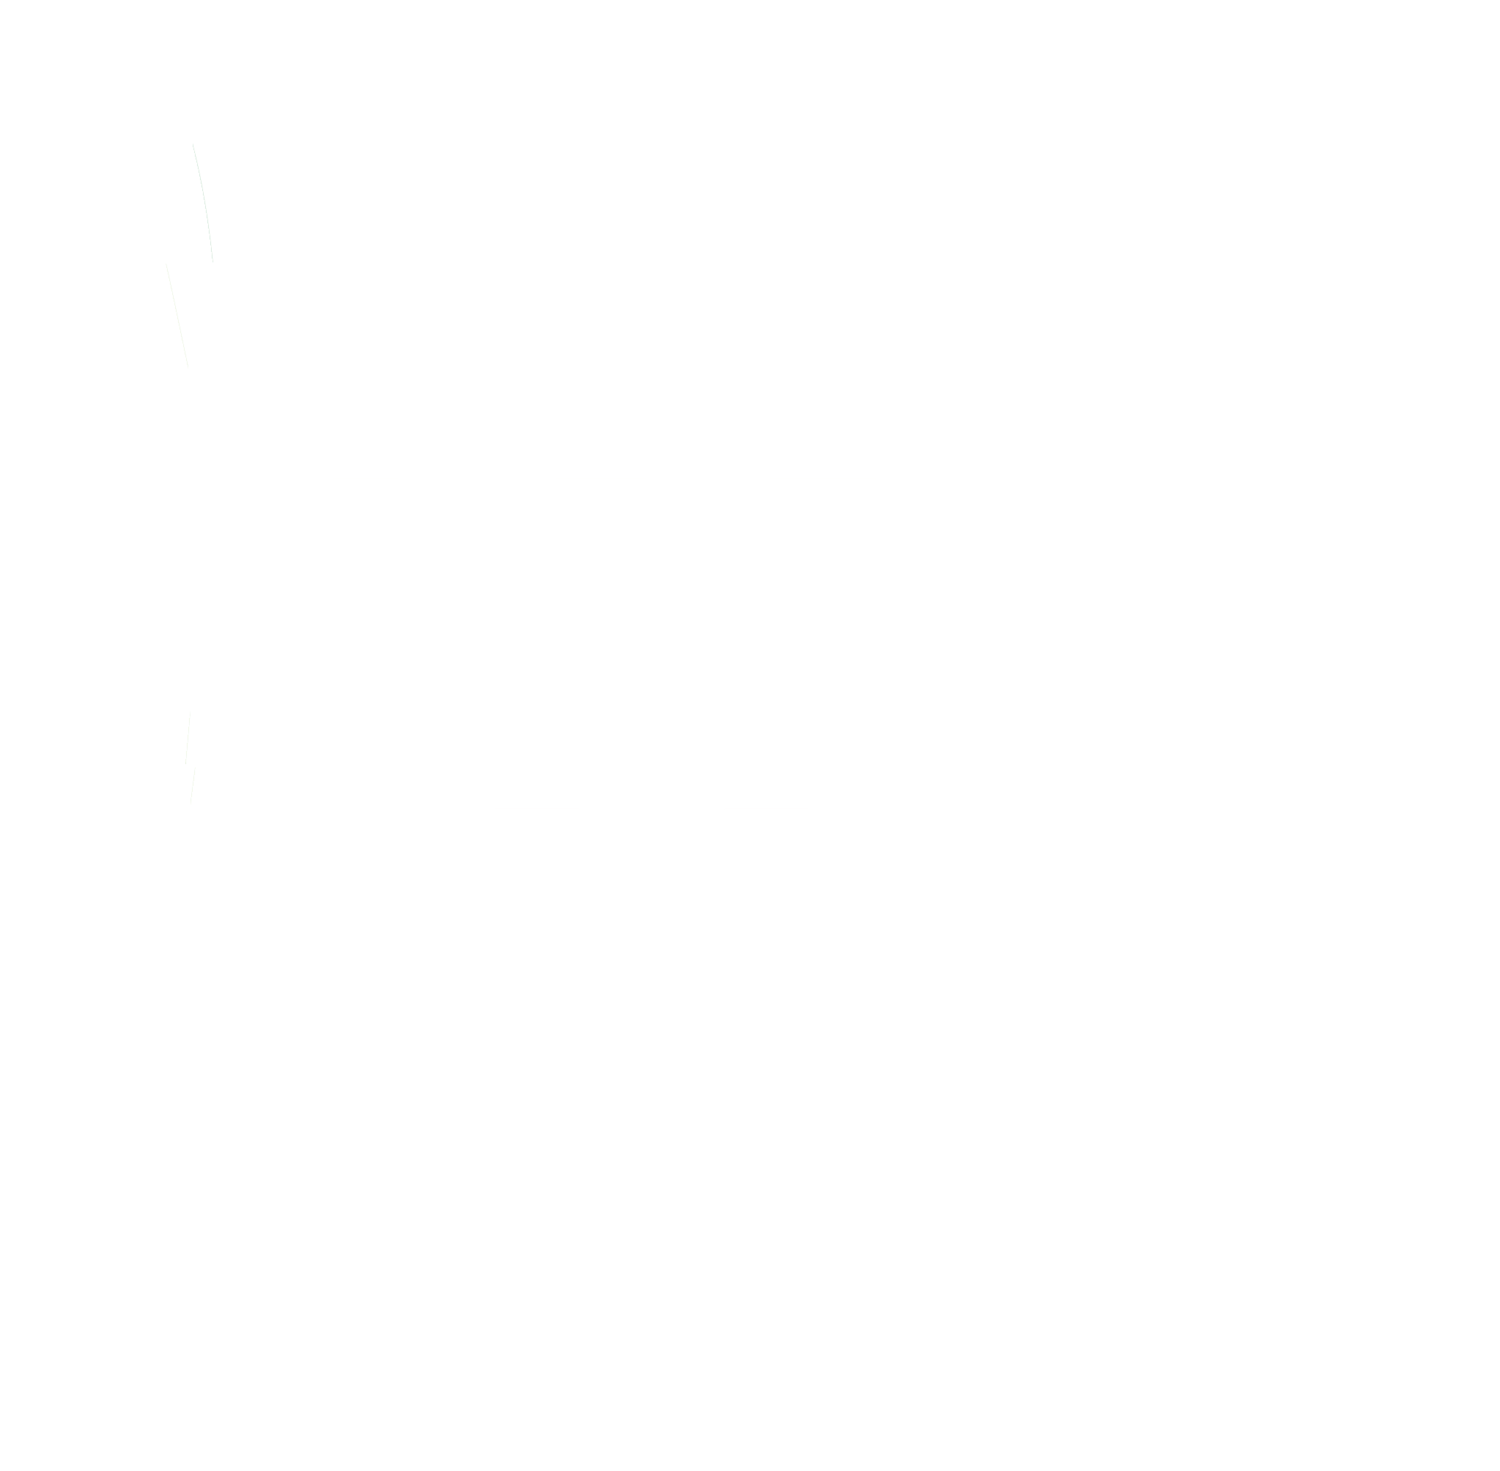 Russell Tavern, Dalby, QLD 